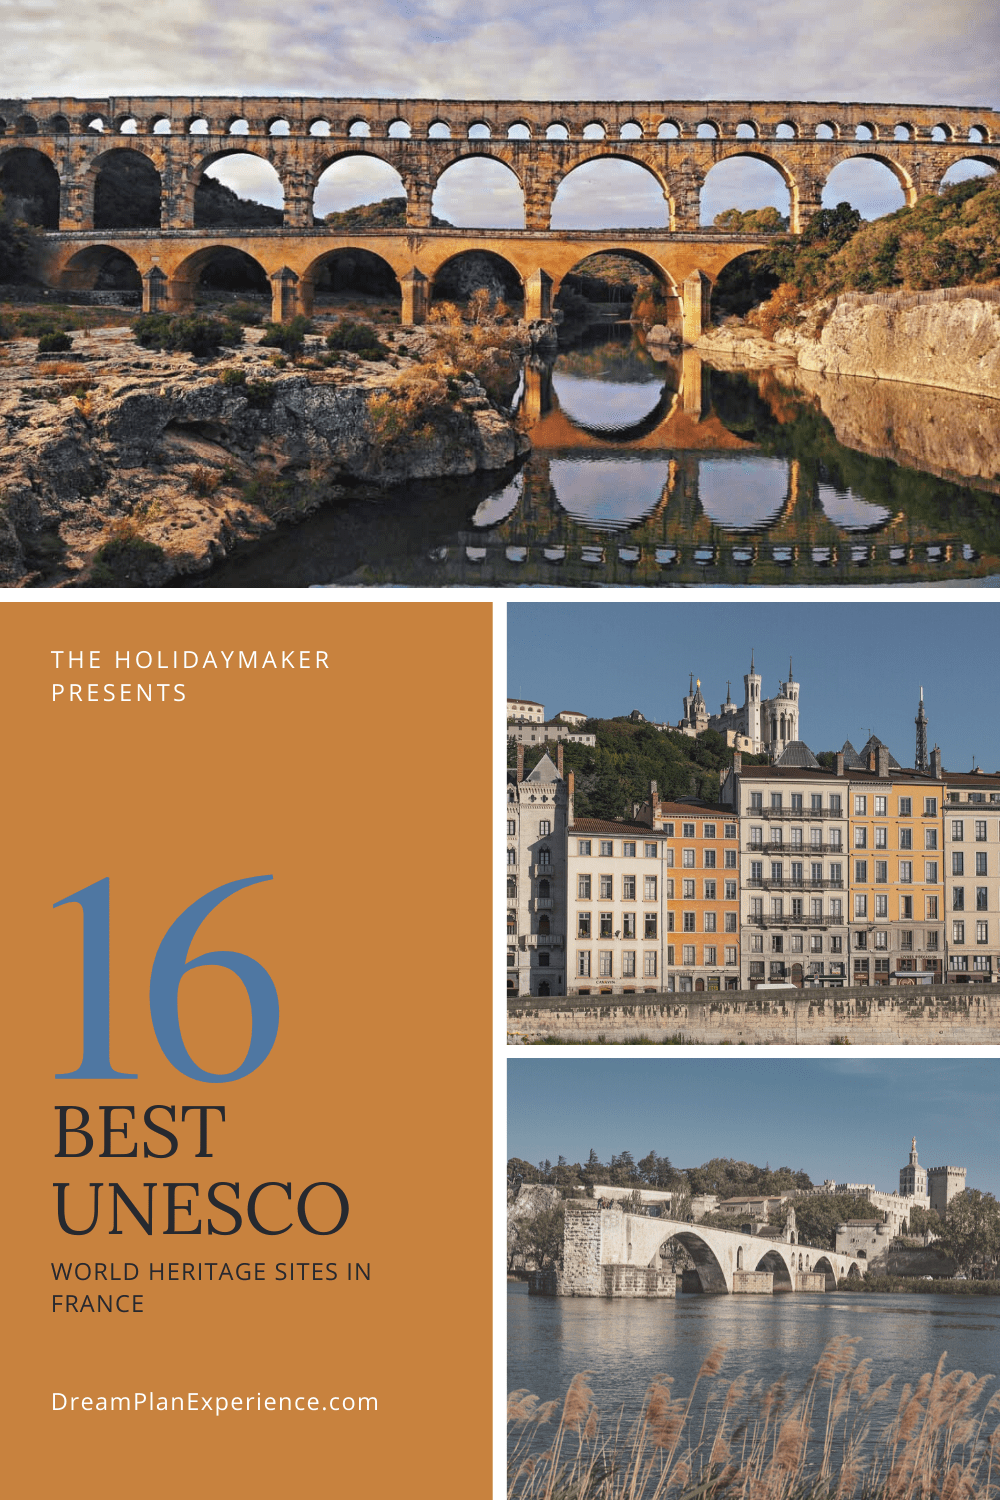 16 of the Best UNESCO World Heritage sites spread throughout France. #France